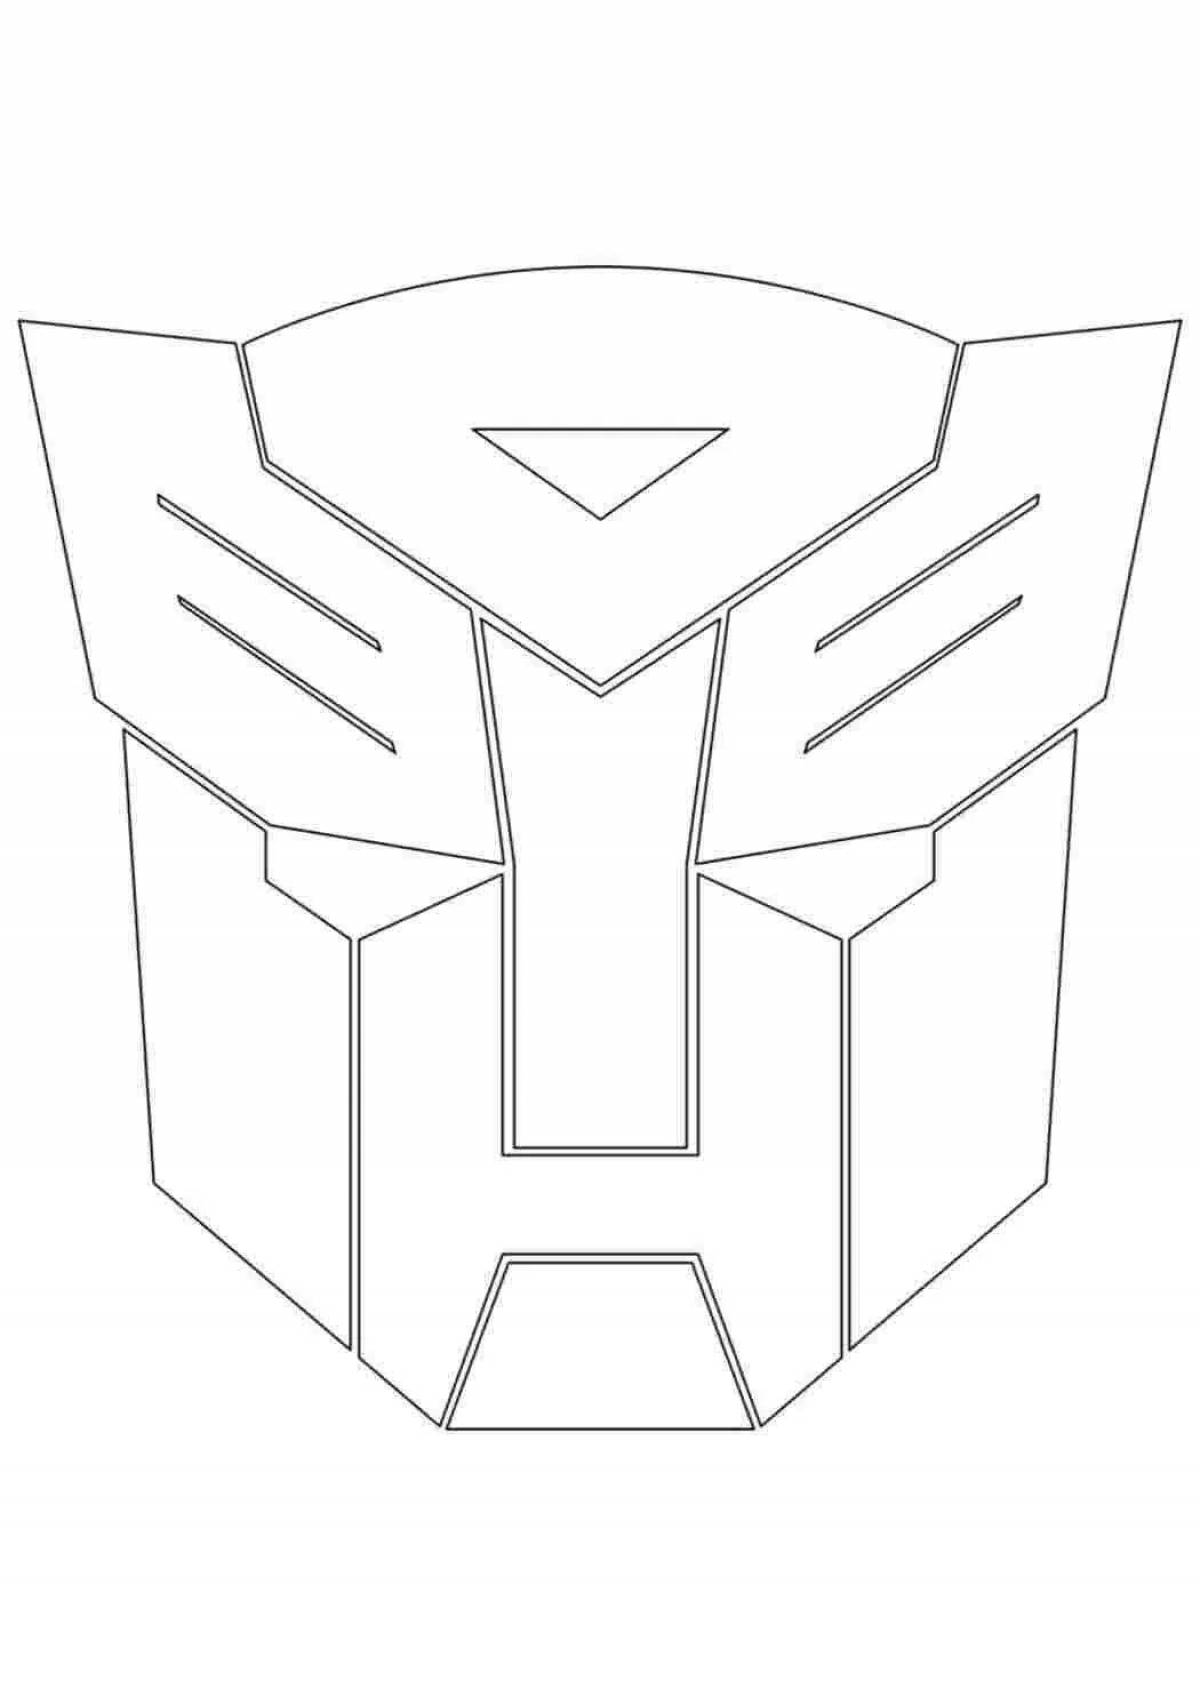 Playful autobot coloring page